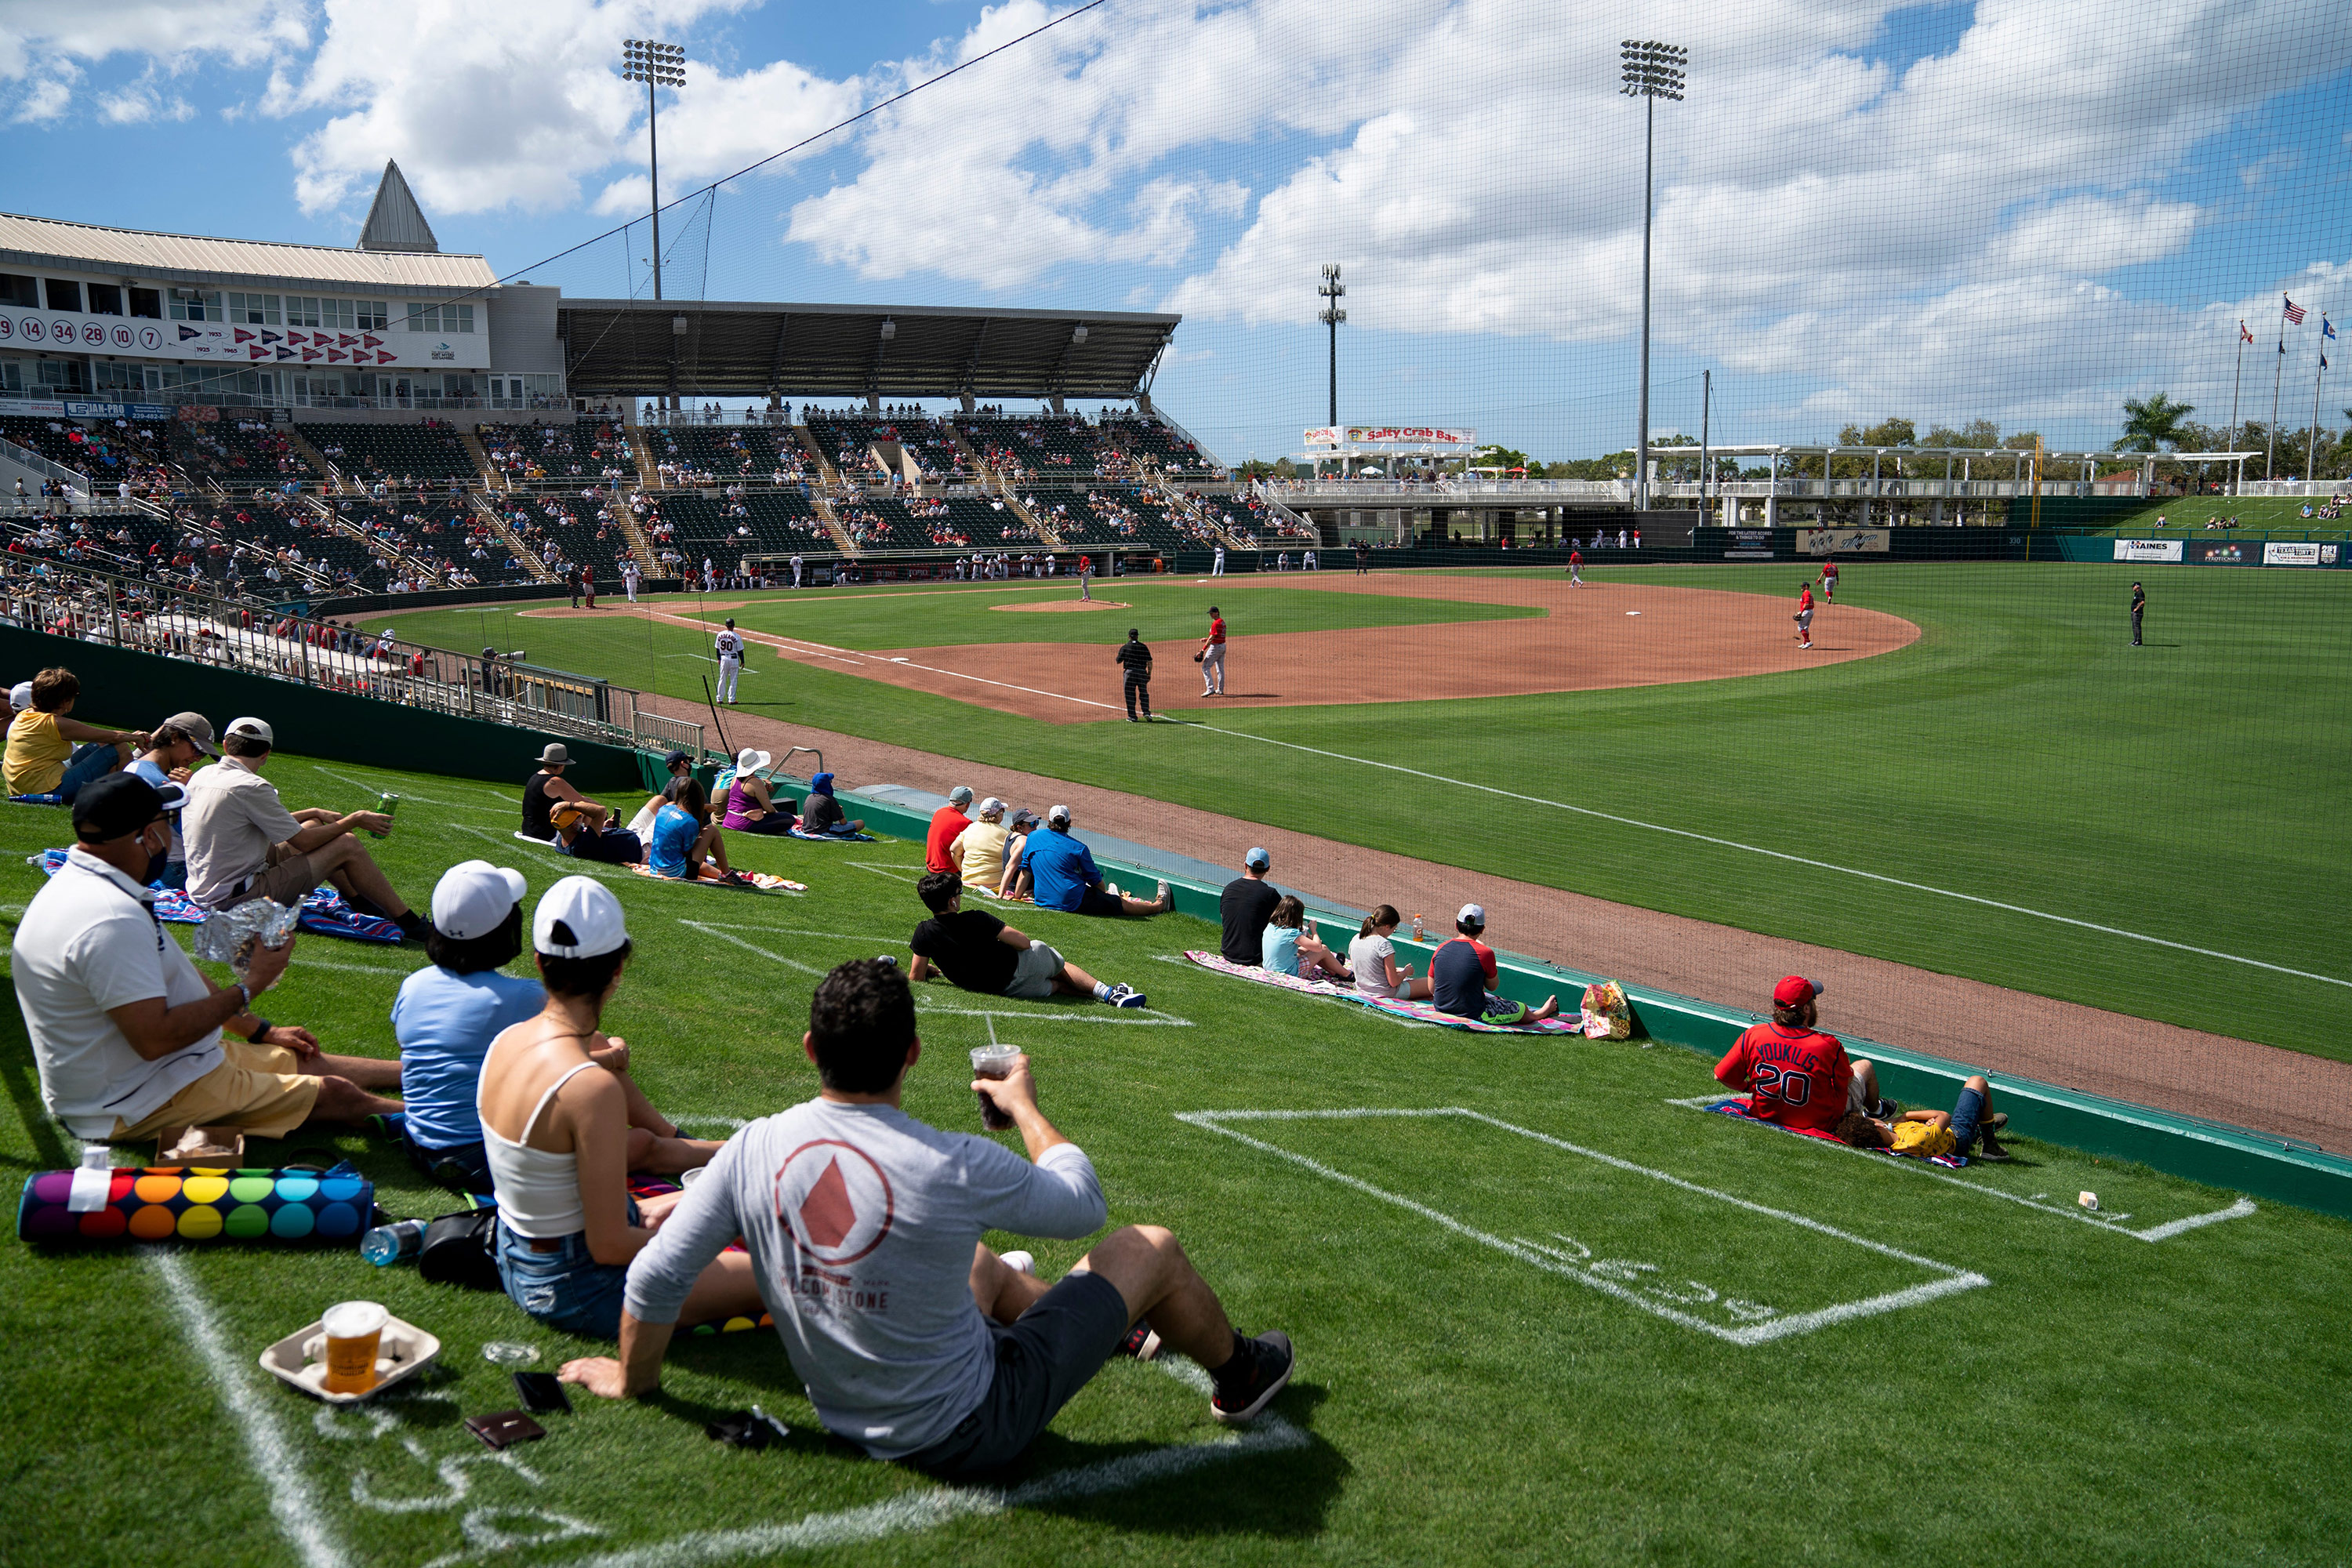 Fans sit in designated rectangles to encourage social distance during the first spring practice game between the Minnesota Twins and Boston Red Sox in Fort Myers, Florida, on February 28th.